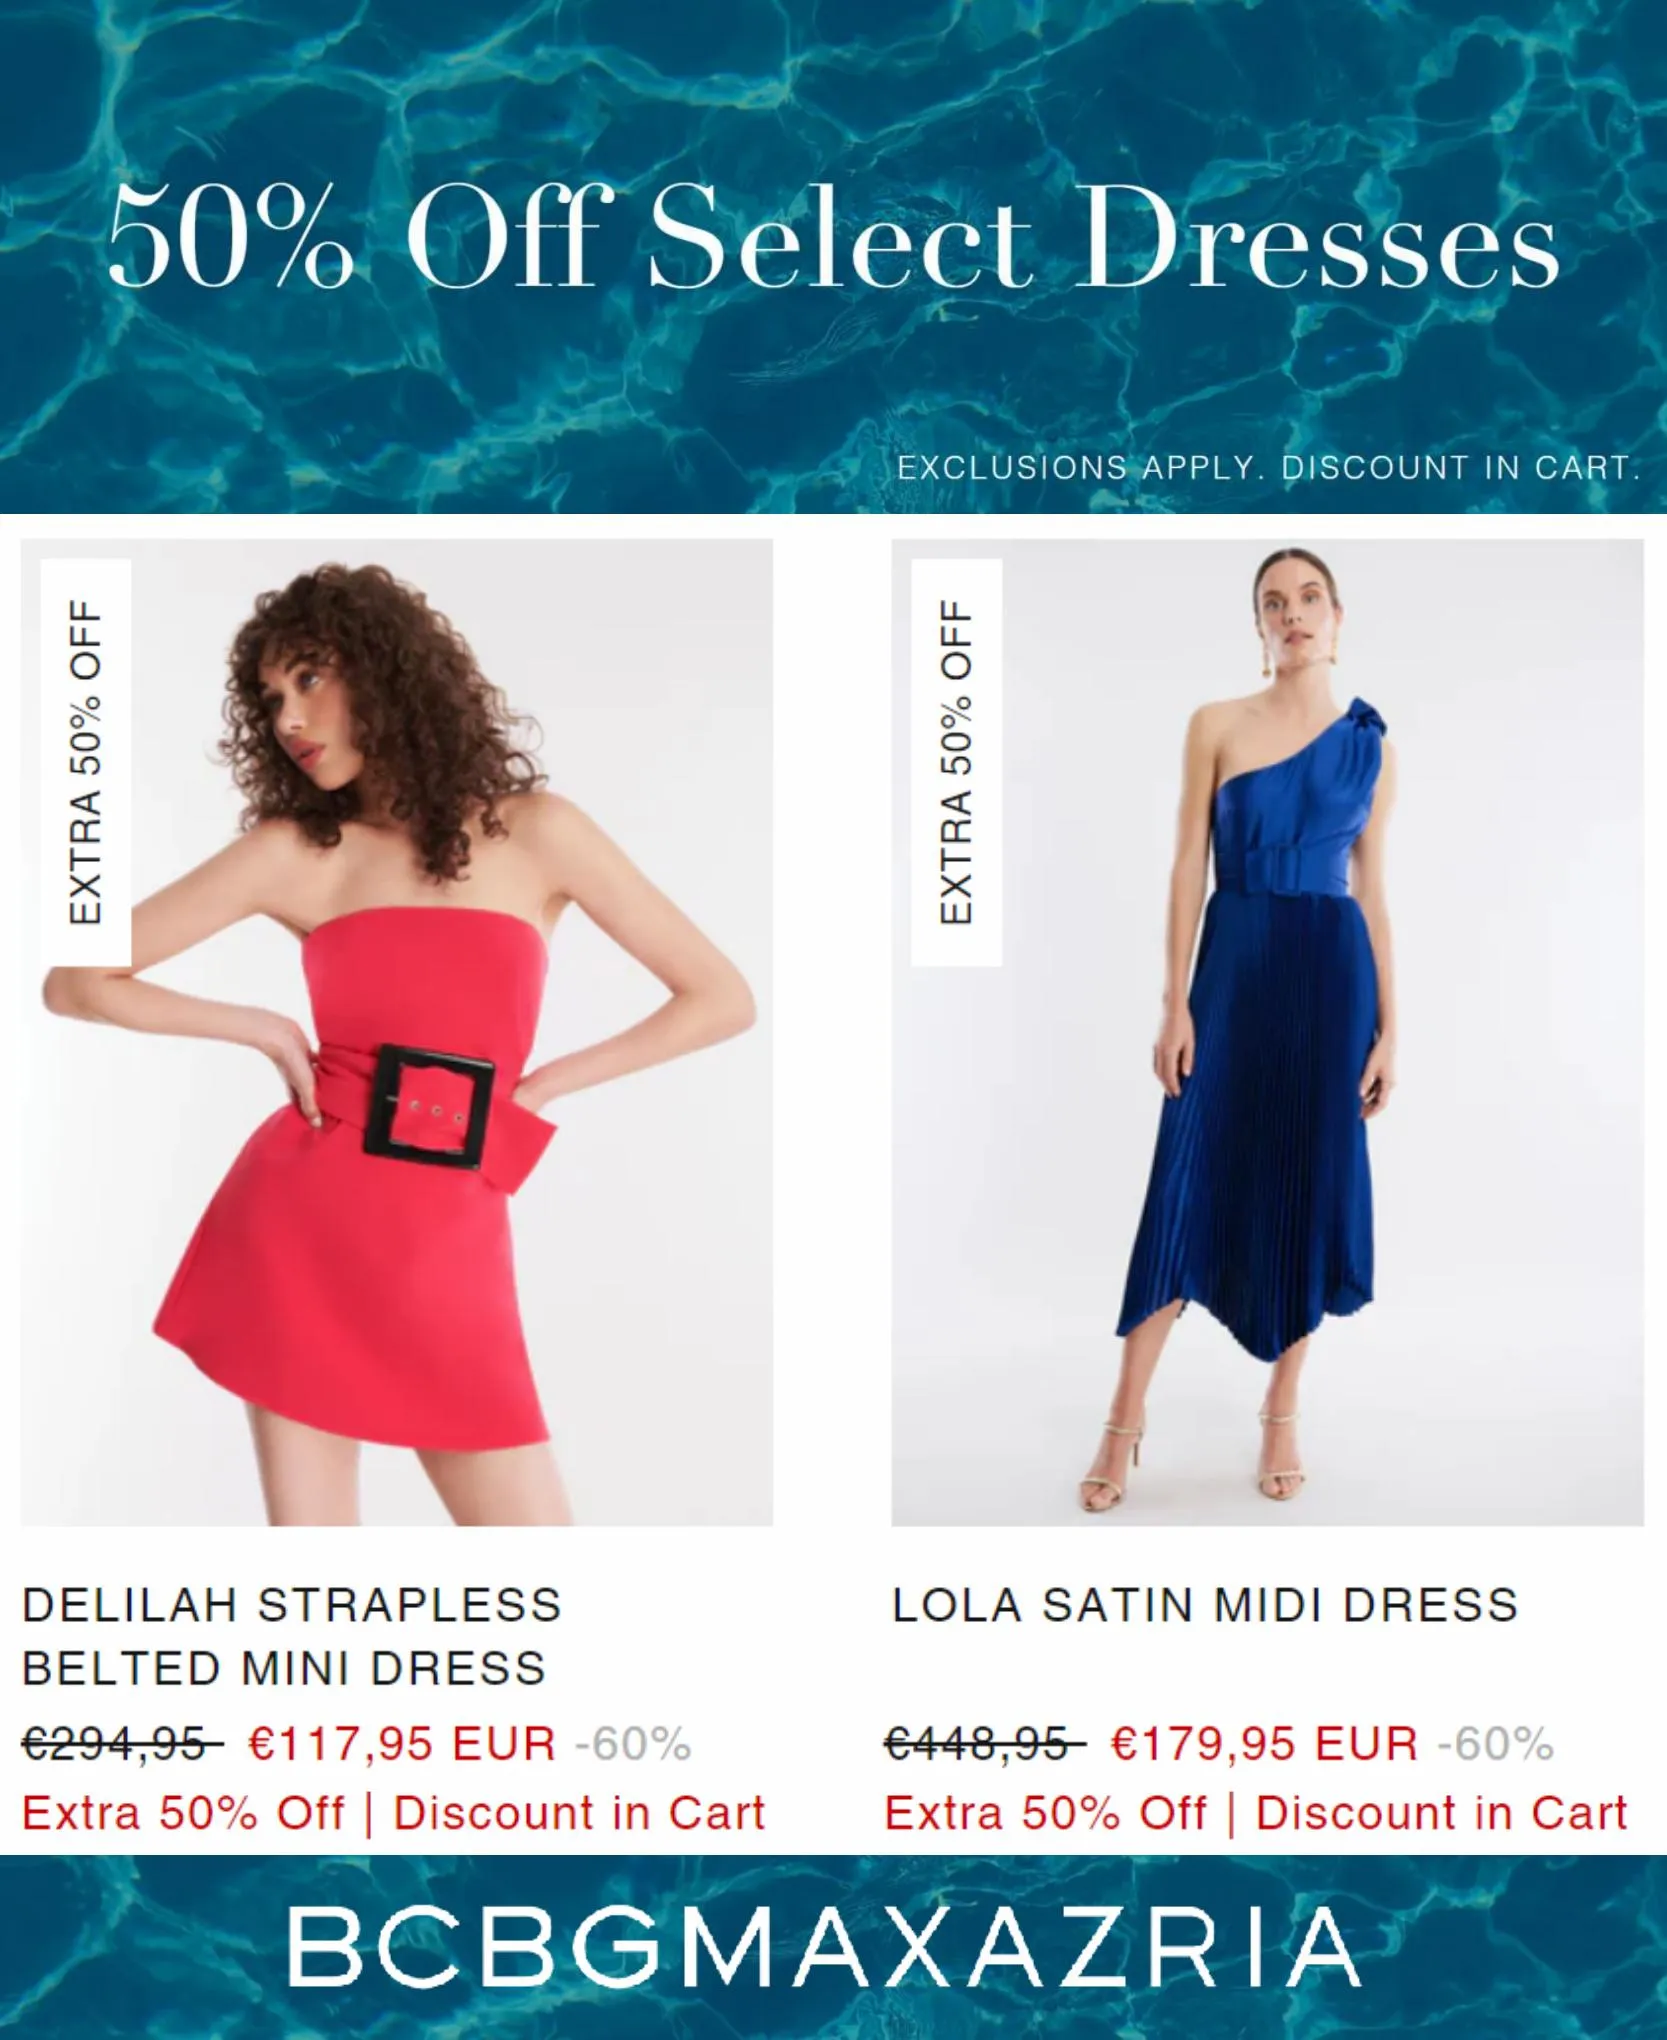 Catalogue 50% Off Select Dresses, page 00005